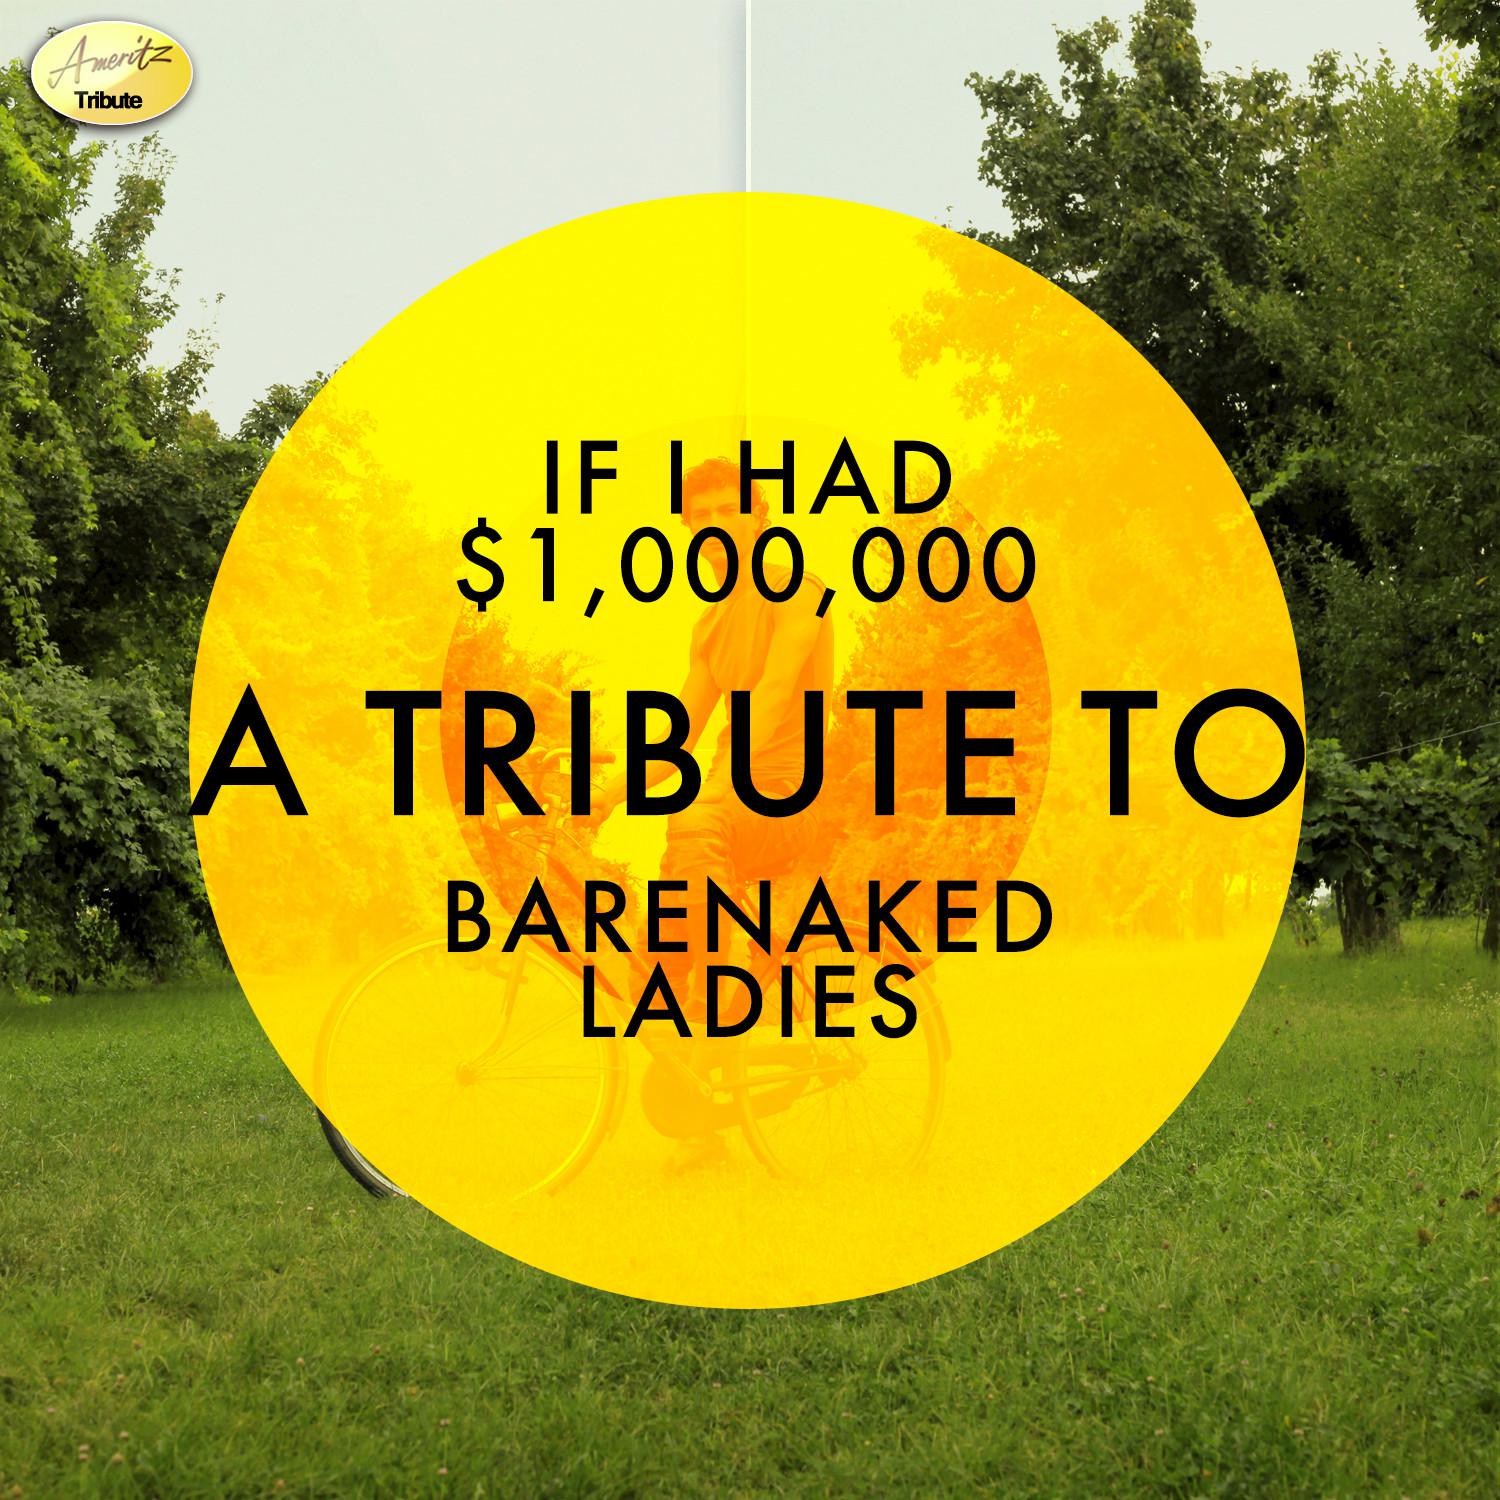 If I had $1,000,000 - A Tribute to Barenaked Ladies